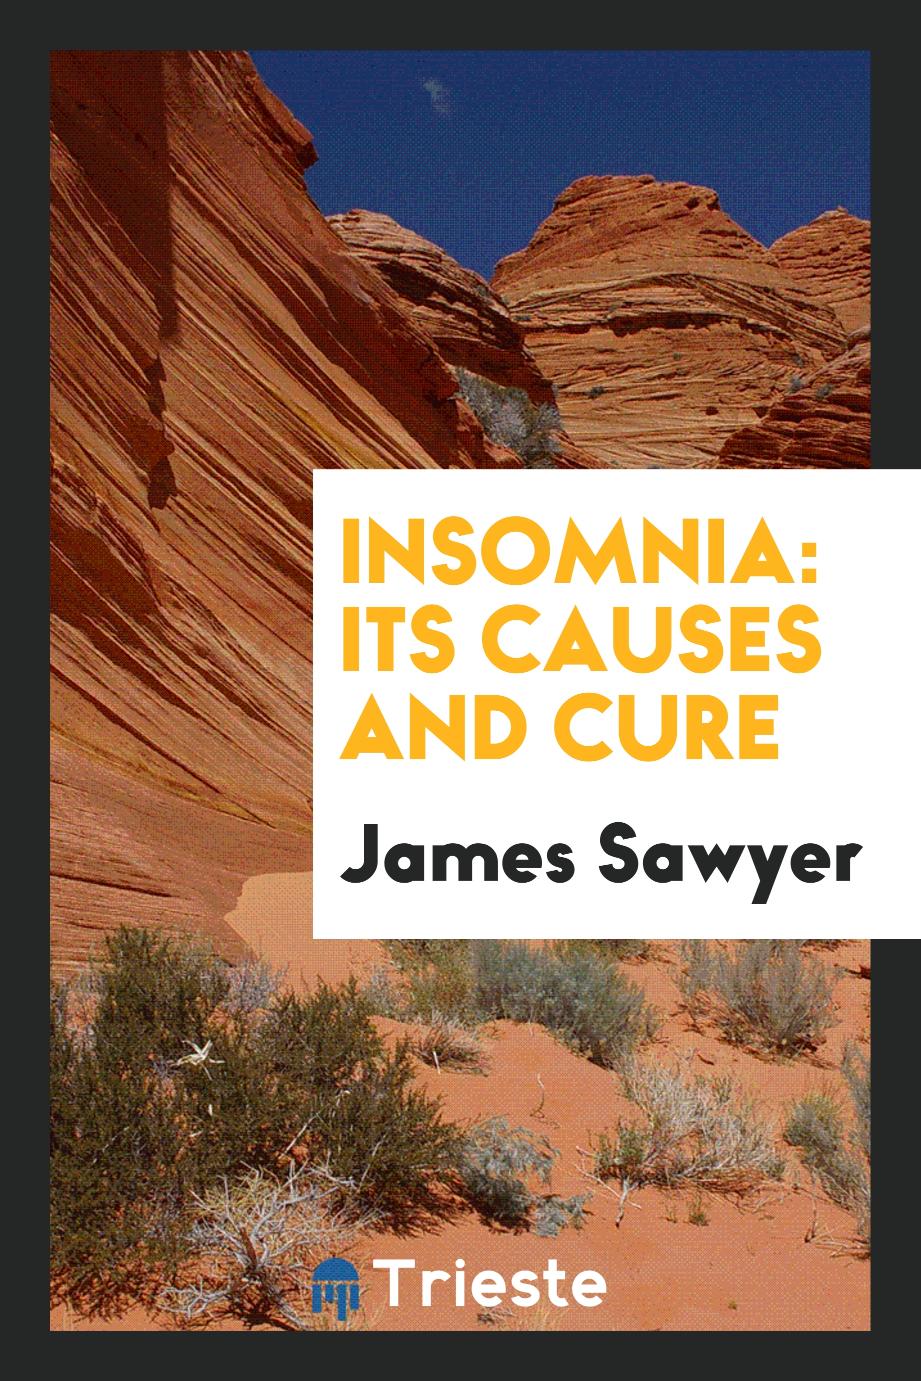 Insomnia: its causes and cure